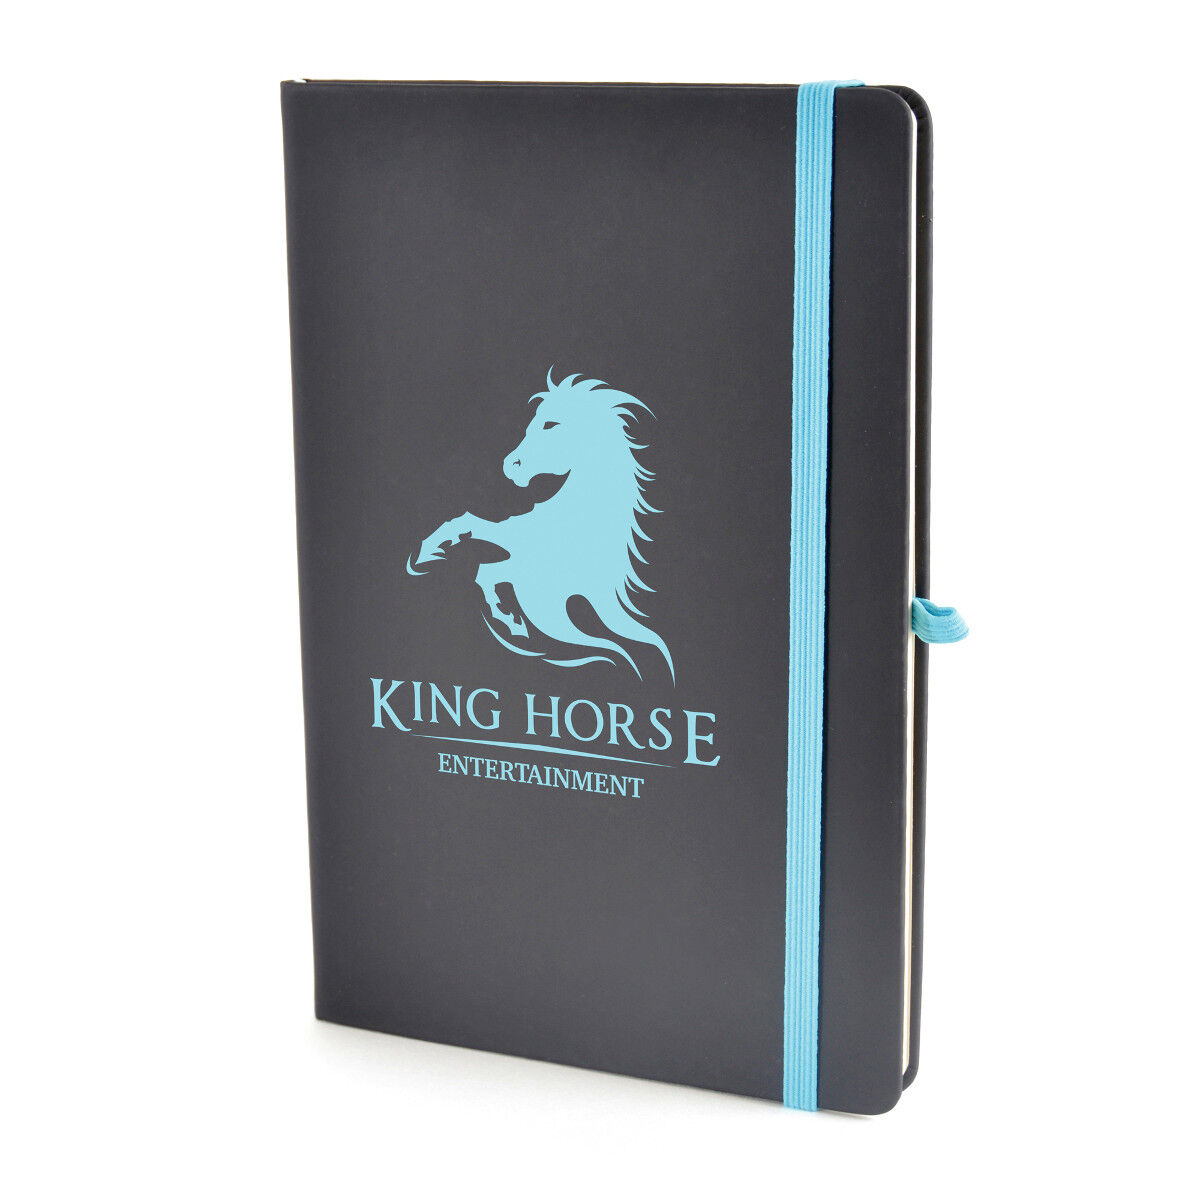 Sample branding on notebook with cyan colour scheme